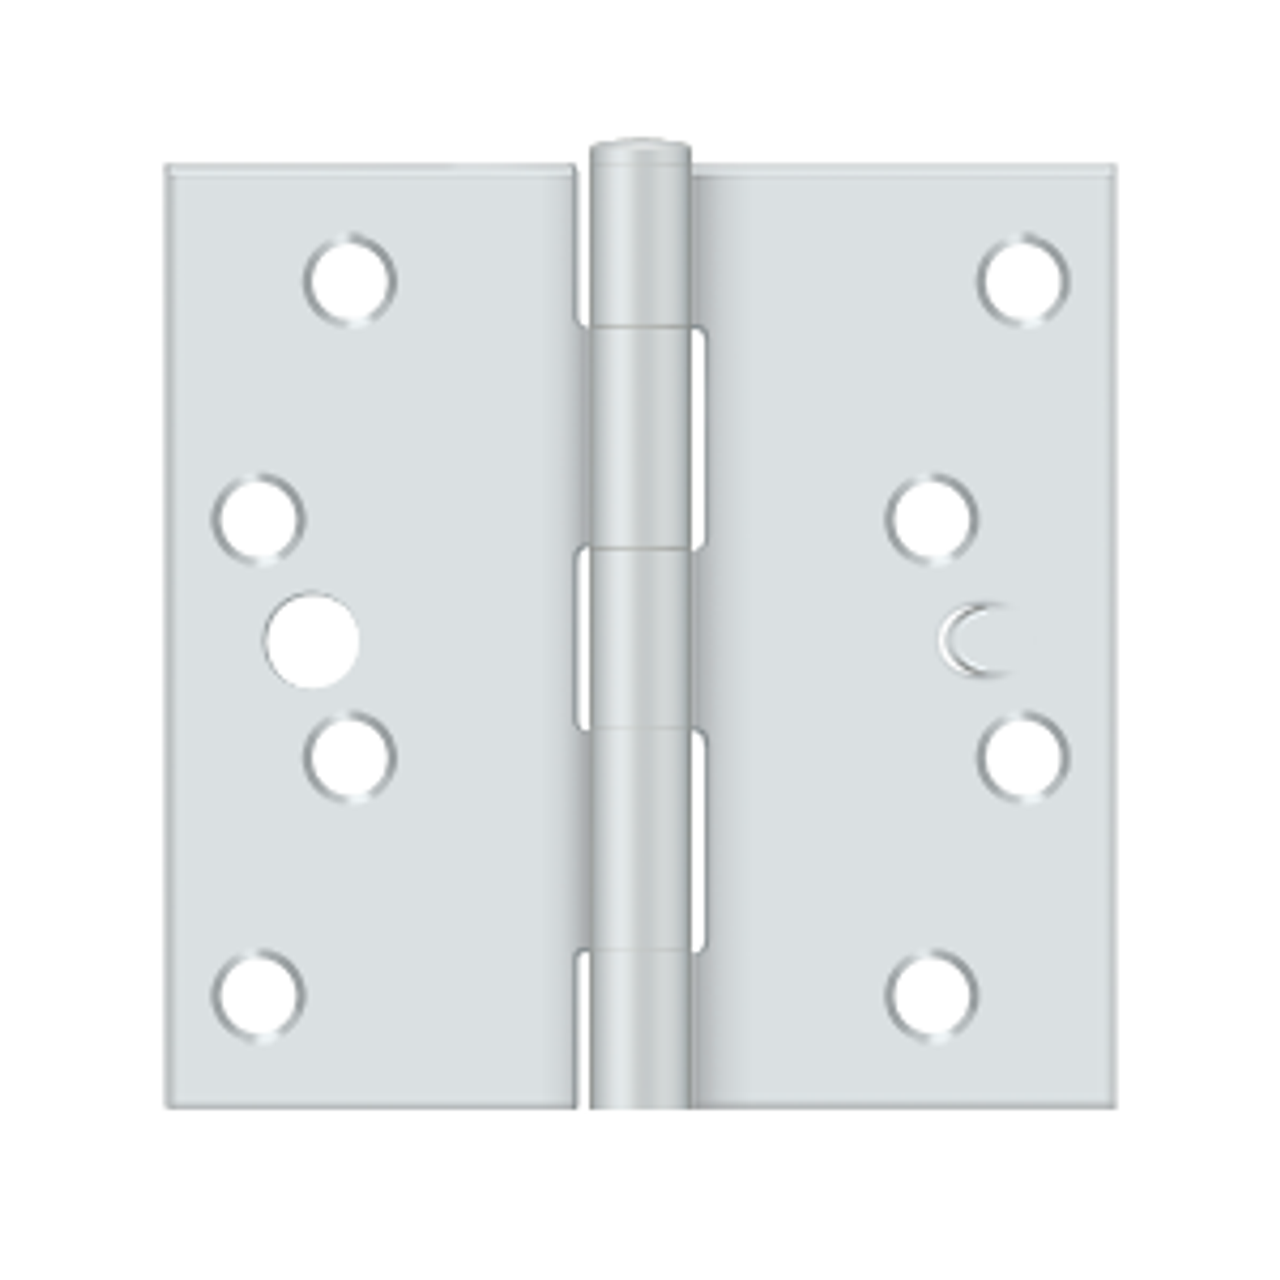 Deltana S44R 4" X 4" SQUARE HINGE, STEEL MATERIAL